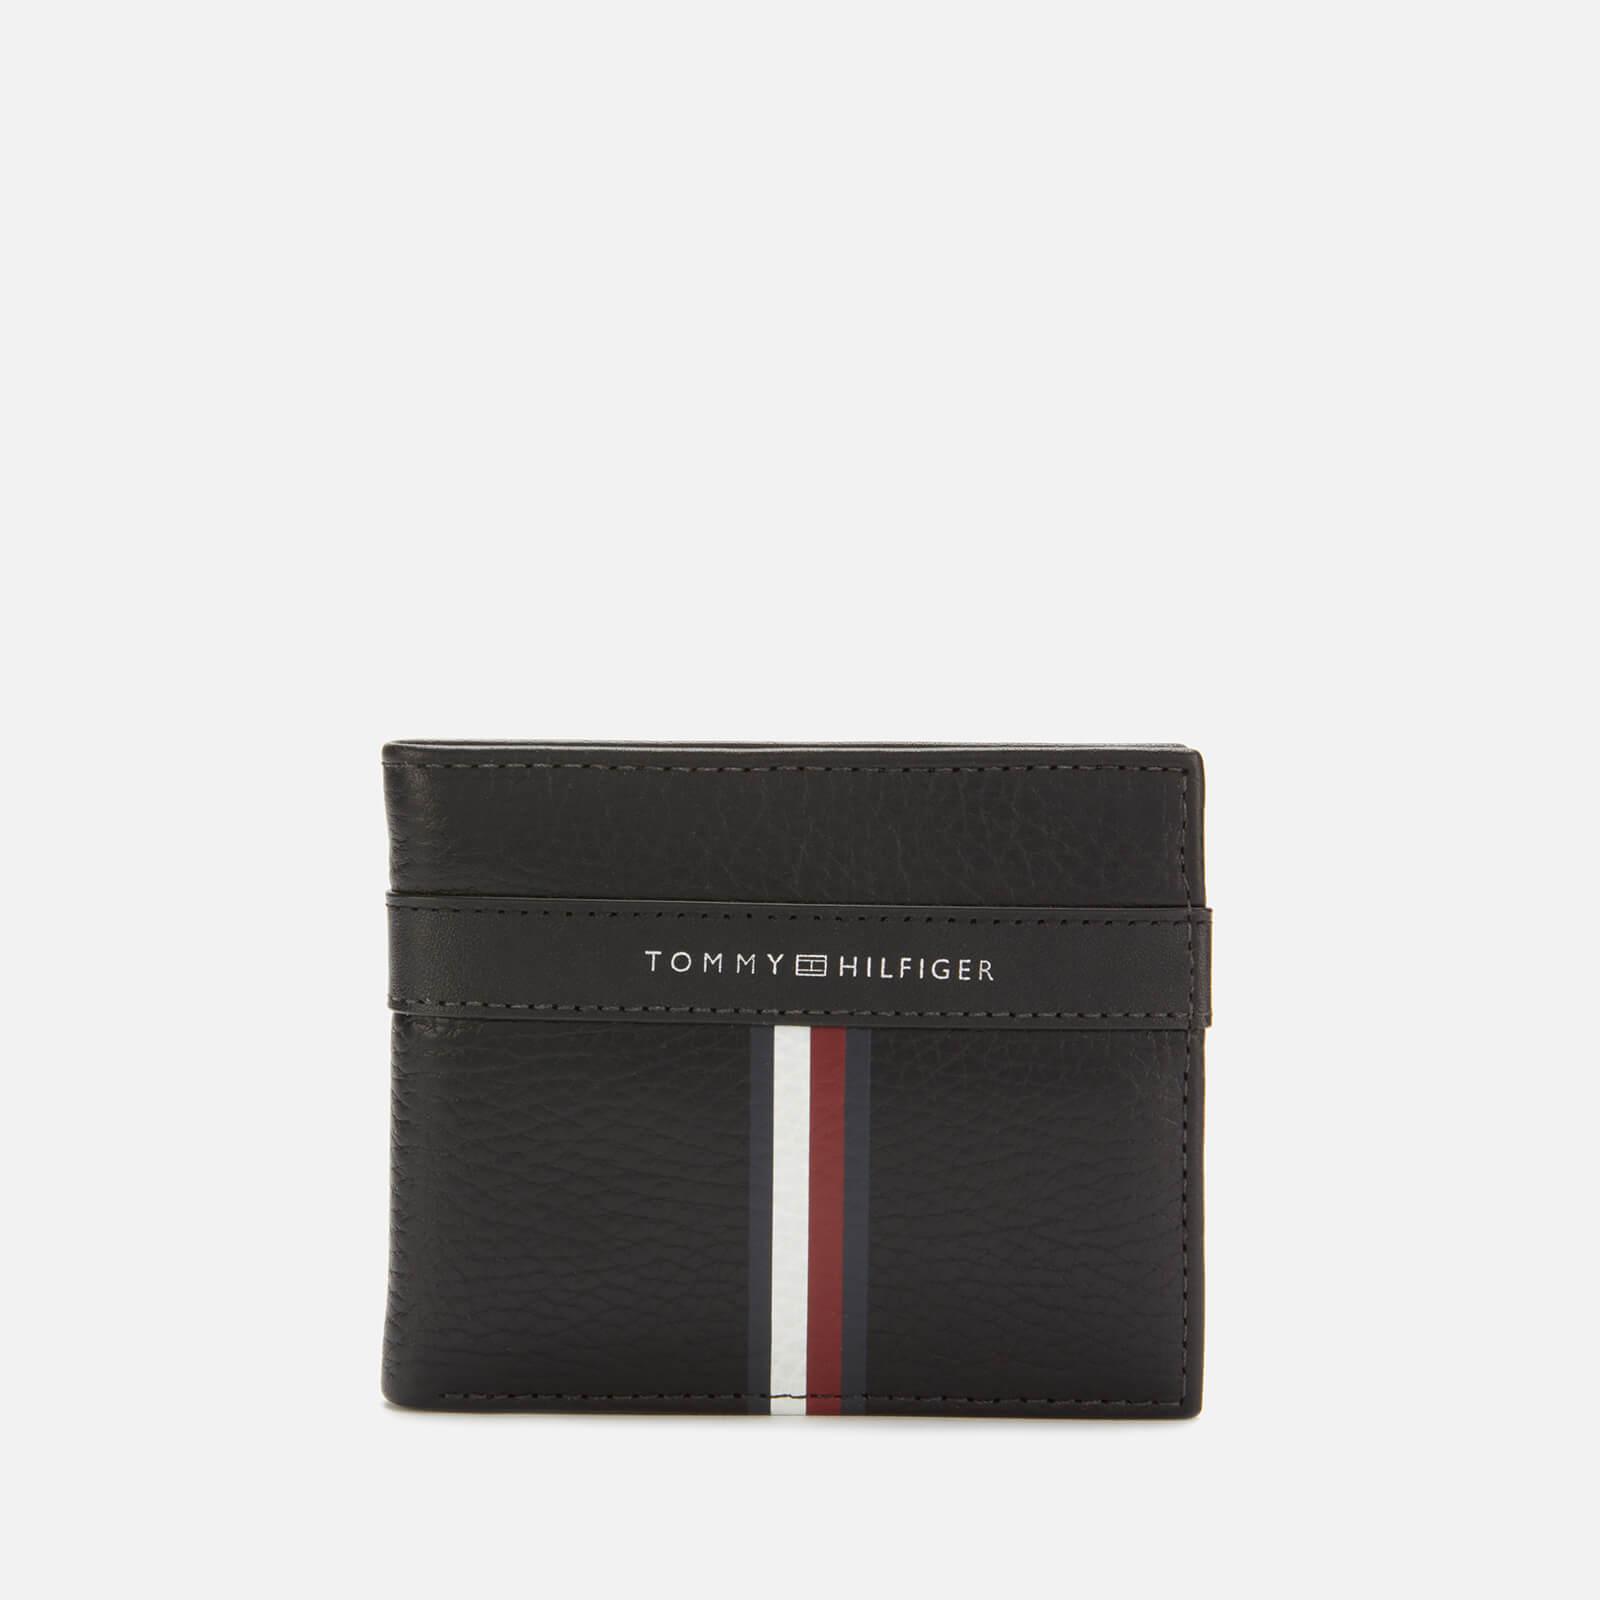 Tommy Hilfiger Corporate Leather Mini Credit Card Wallet in Black for Men -  Lyst